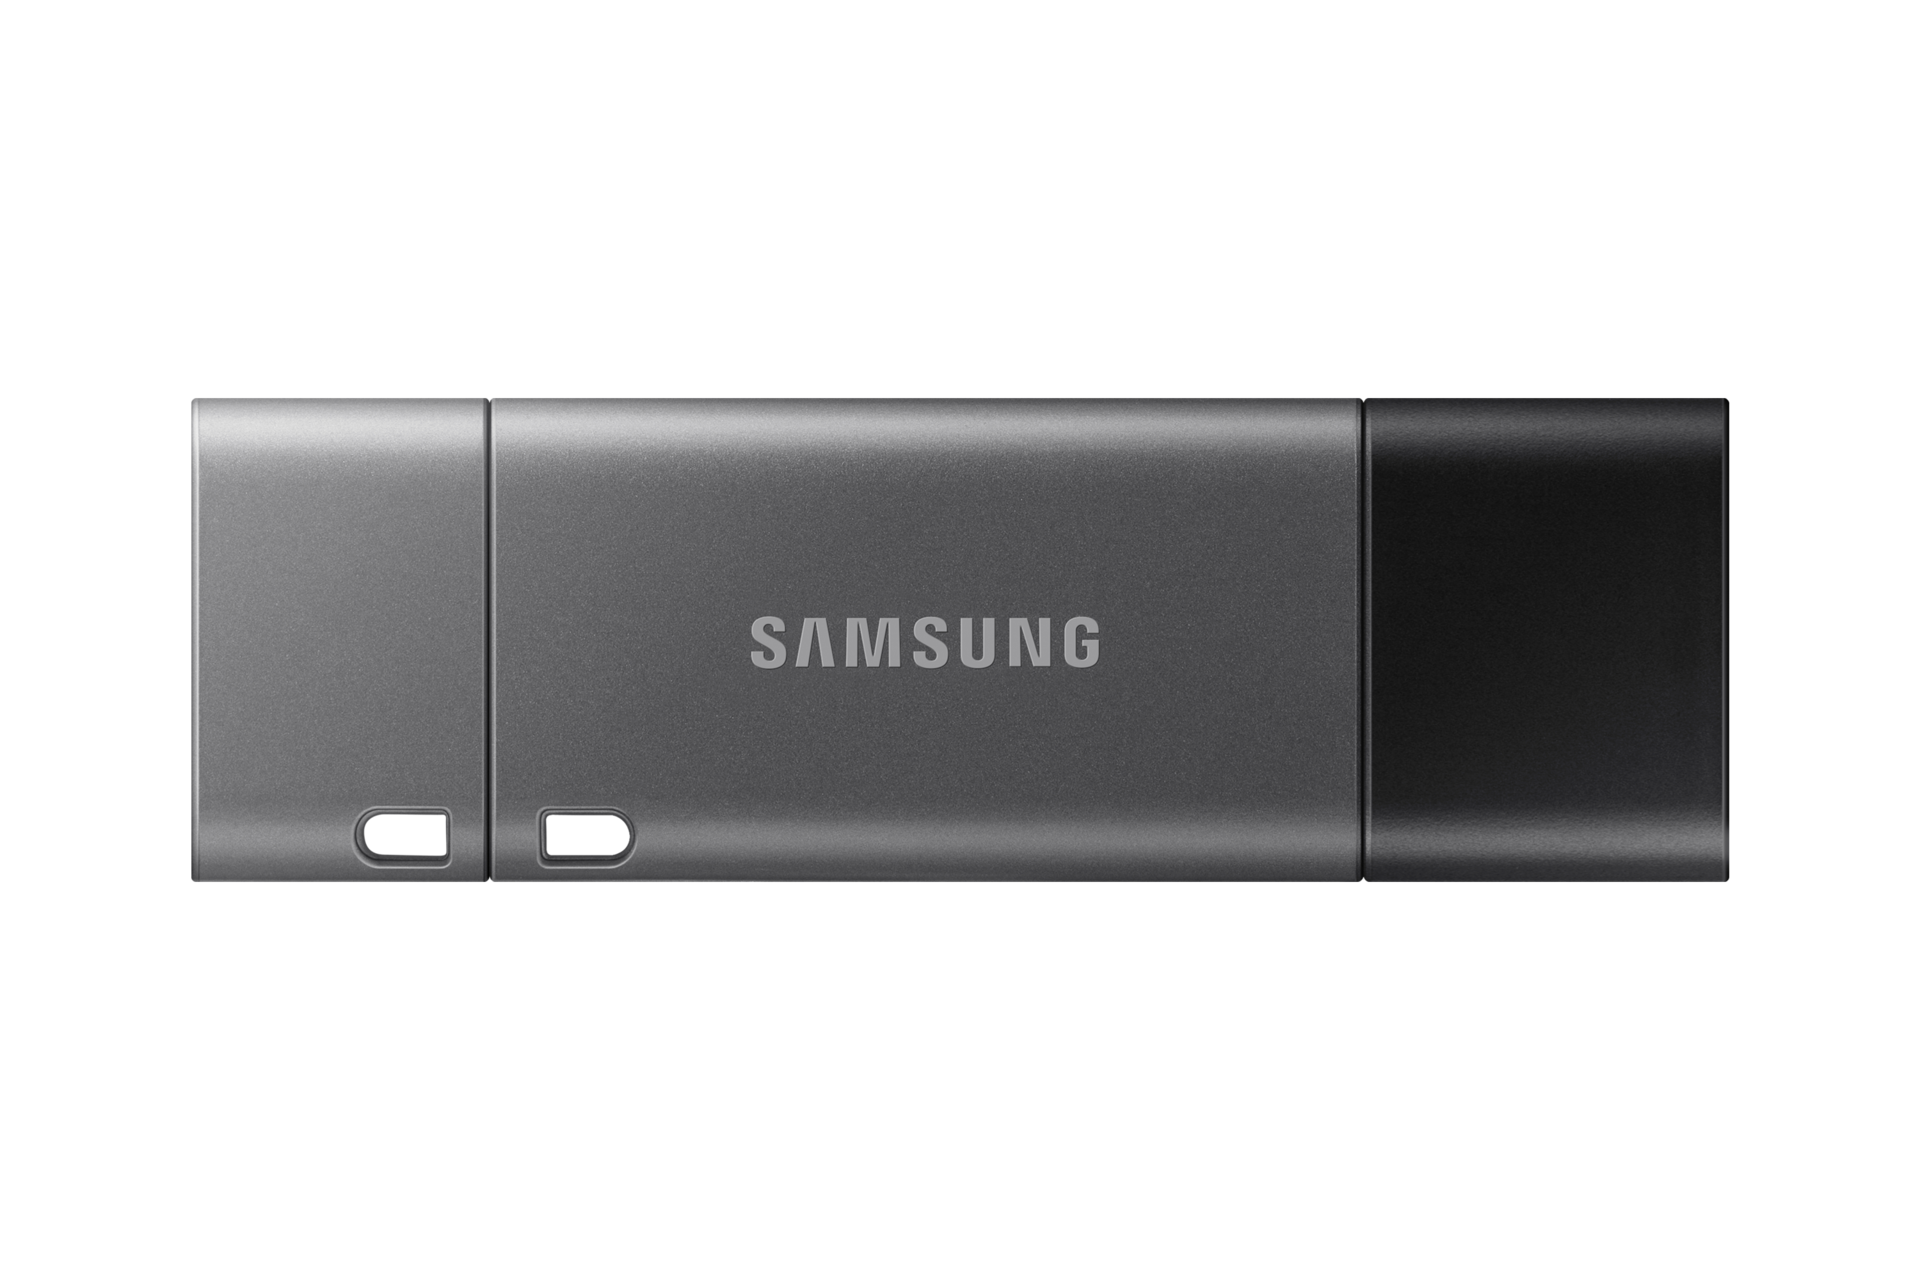 https://images.samsung.com/is/image/samsung/in-usb-3-1-flash-drive-duo-plus-muf-128db-apc-frontblack-290365357?$650_519_PNG$